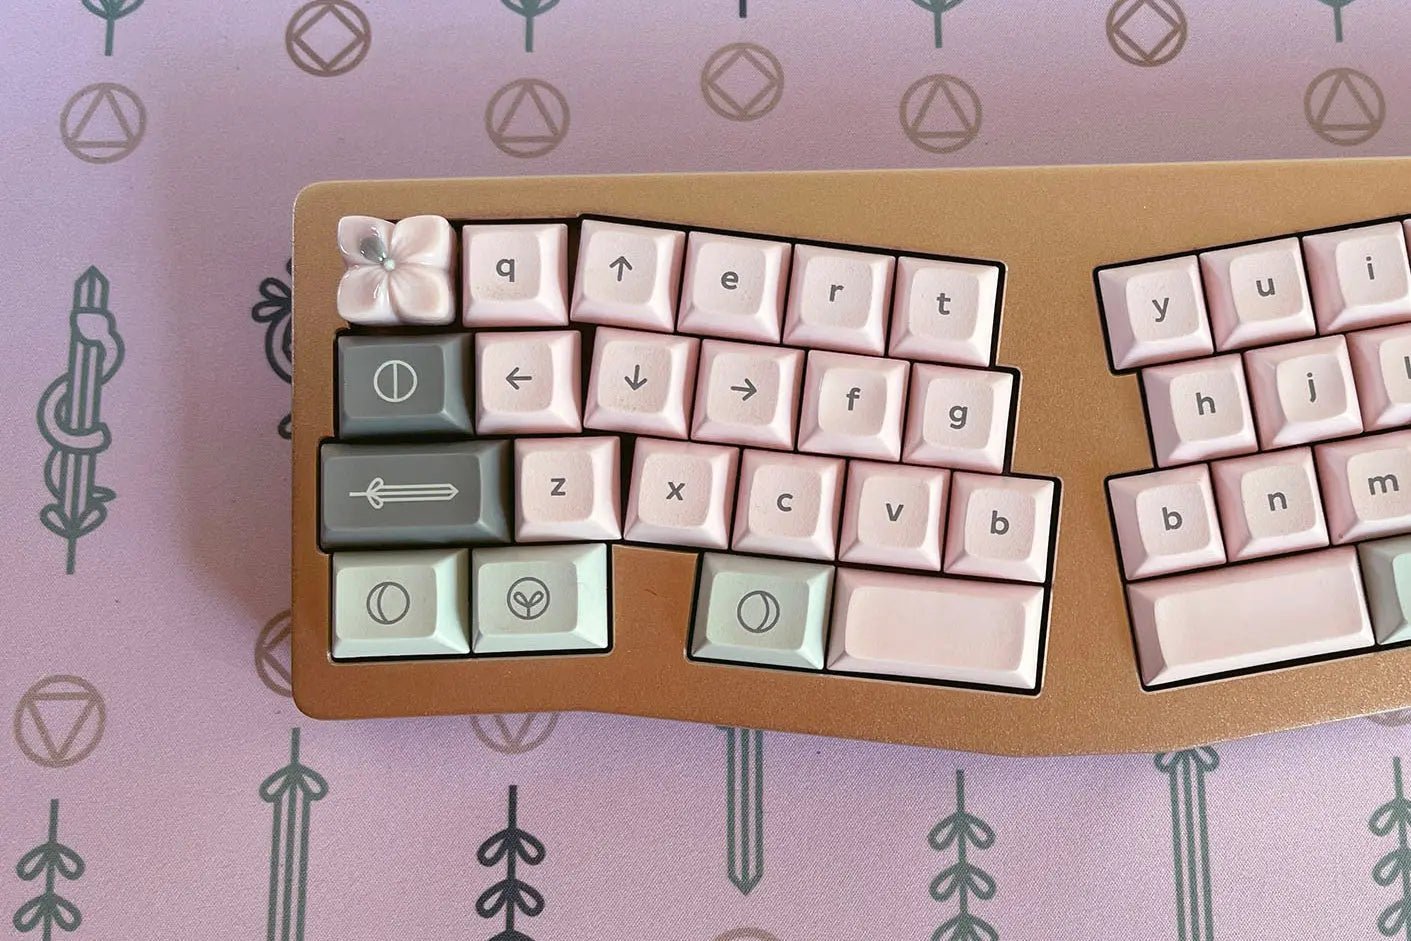 Witch Girl Floral Artisans | Floral Artisan Keycaps by Mintlodica | CS-WG-BLUSH